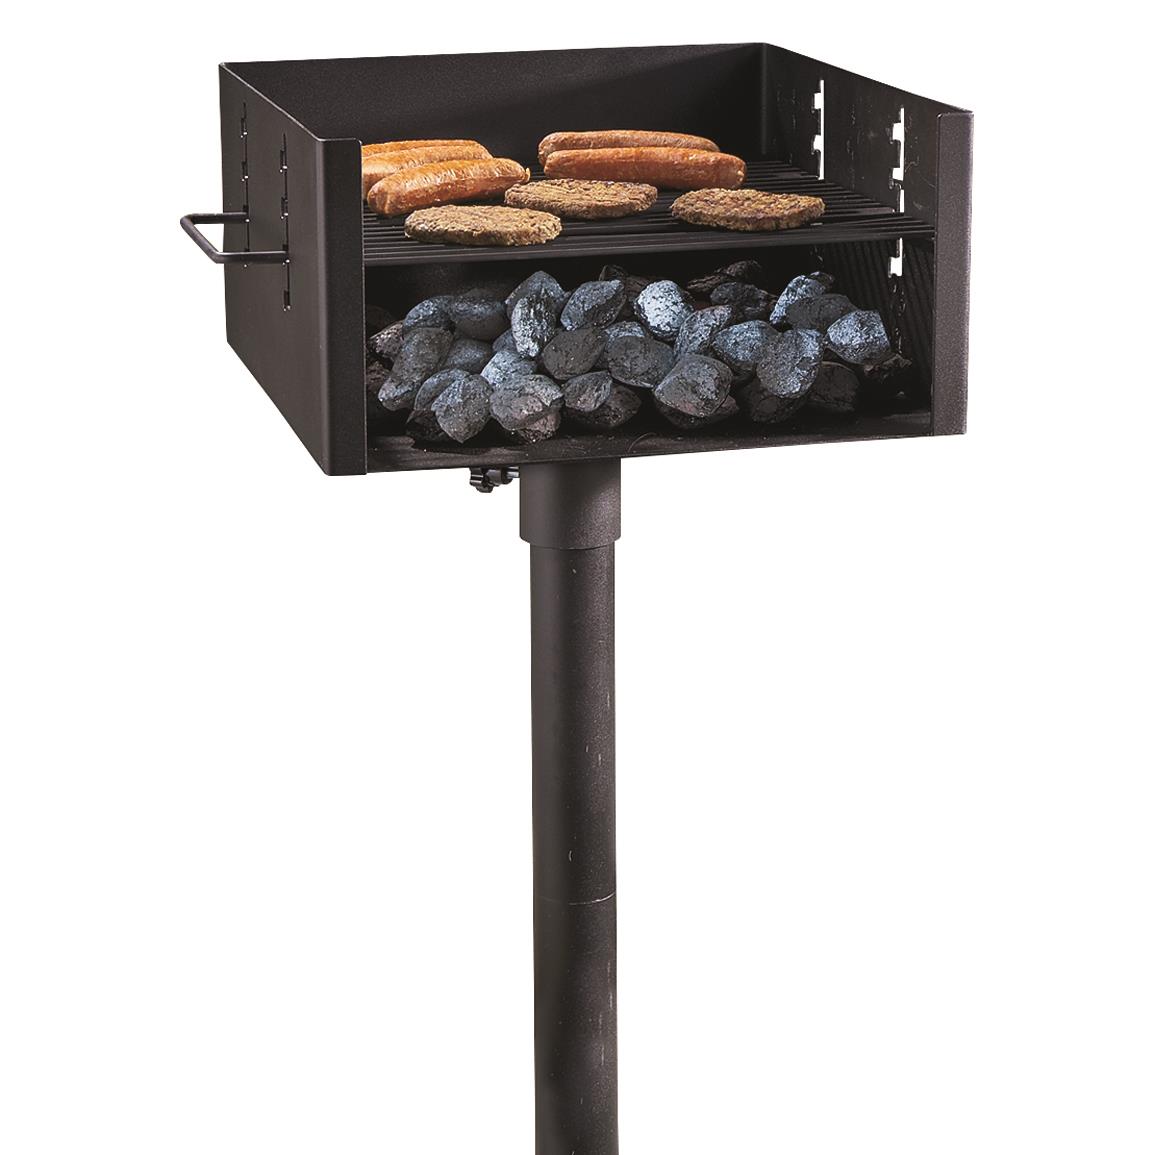 Guide Gear Heavy-Duty Park Style Charcoal Grill, Large